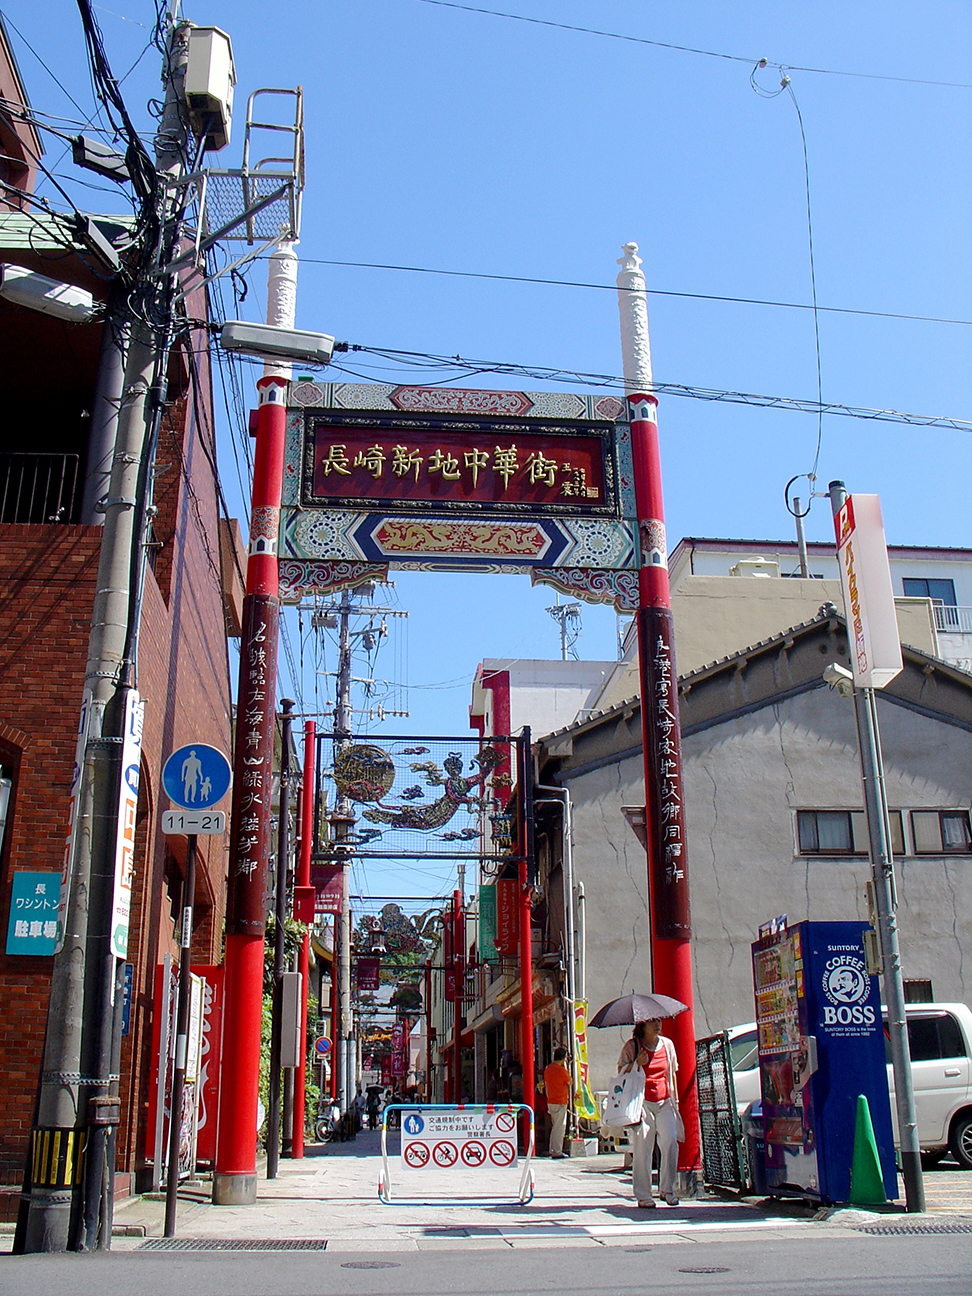 The entrance of Chinatown.